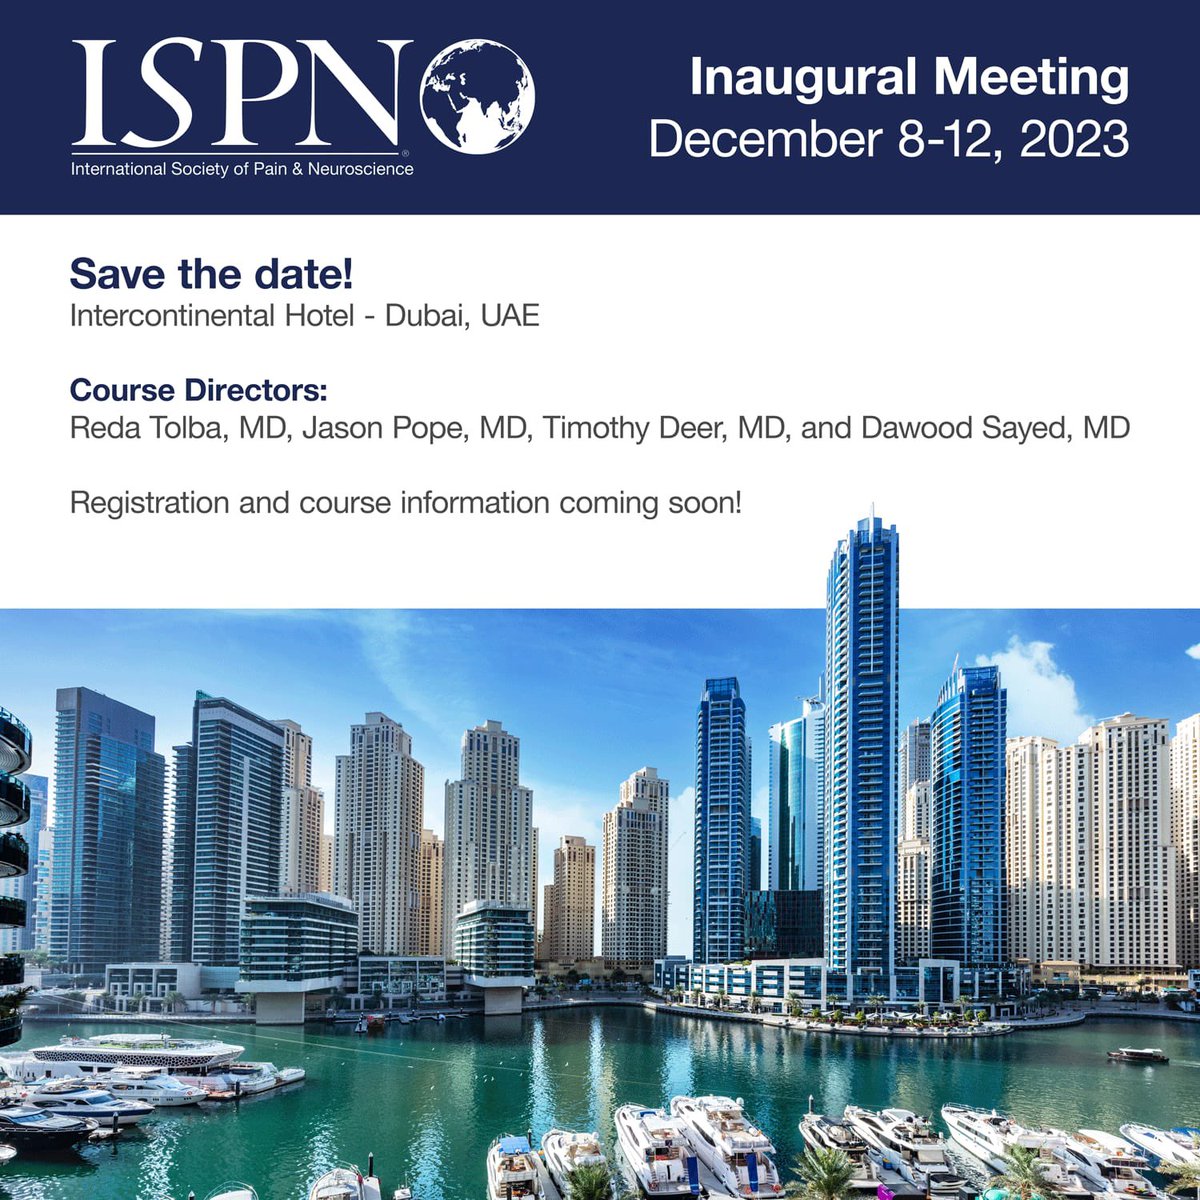 We are excited to announce the Inaugural ISPN Meeting taking place in Dubai on December 8-12, 2023! Stay tuned as more details are announced ASPNpain.com #international #pain #neuroscience #ISPN